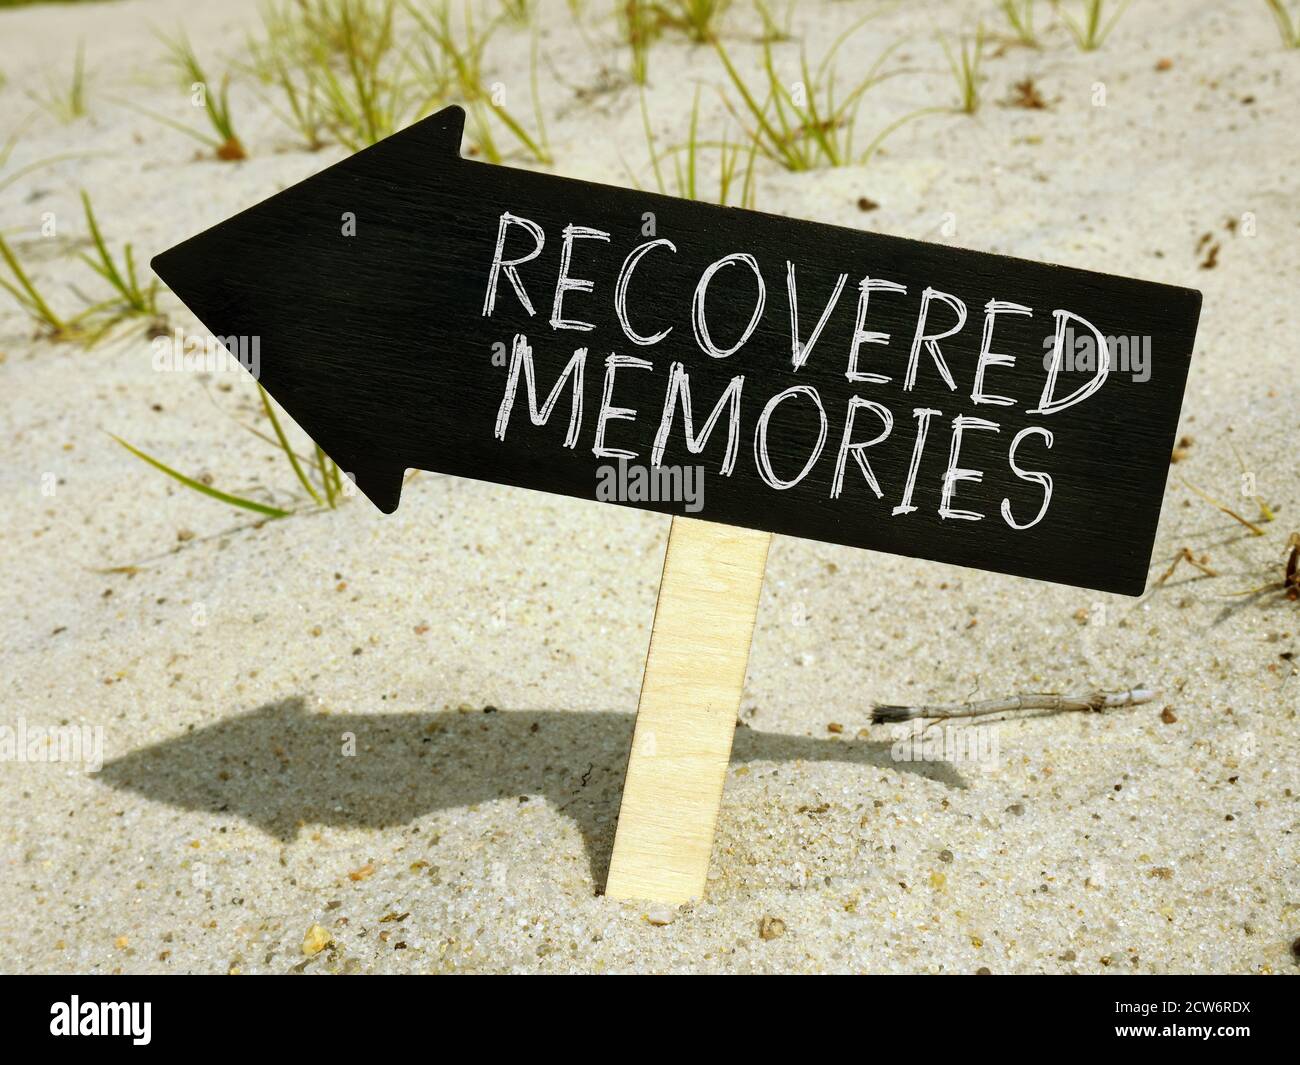 Recovered memories inscription on the black arrow showing the direction. Stock Photo